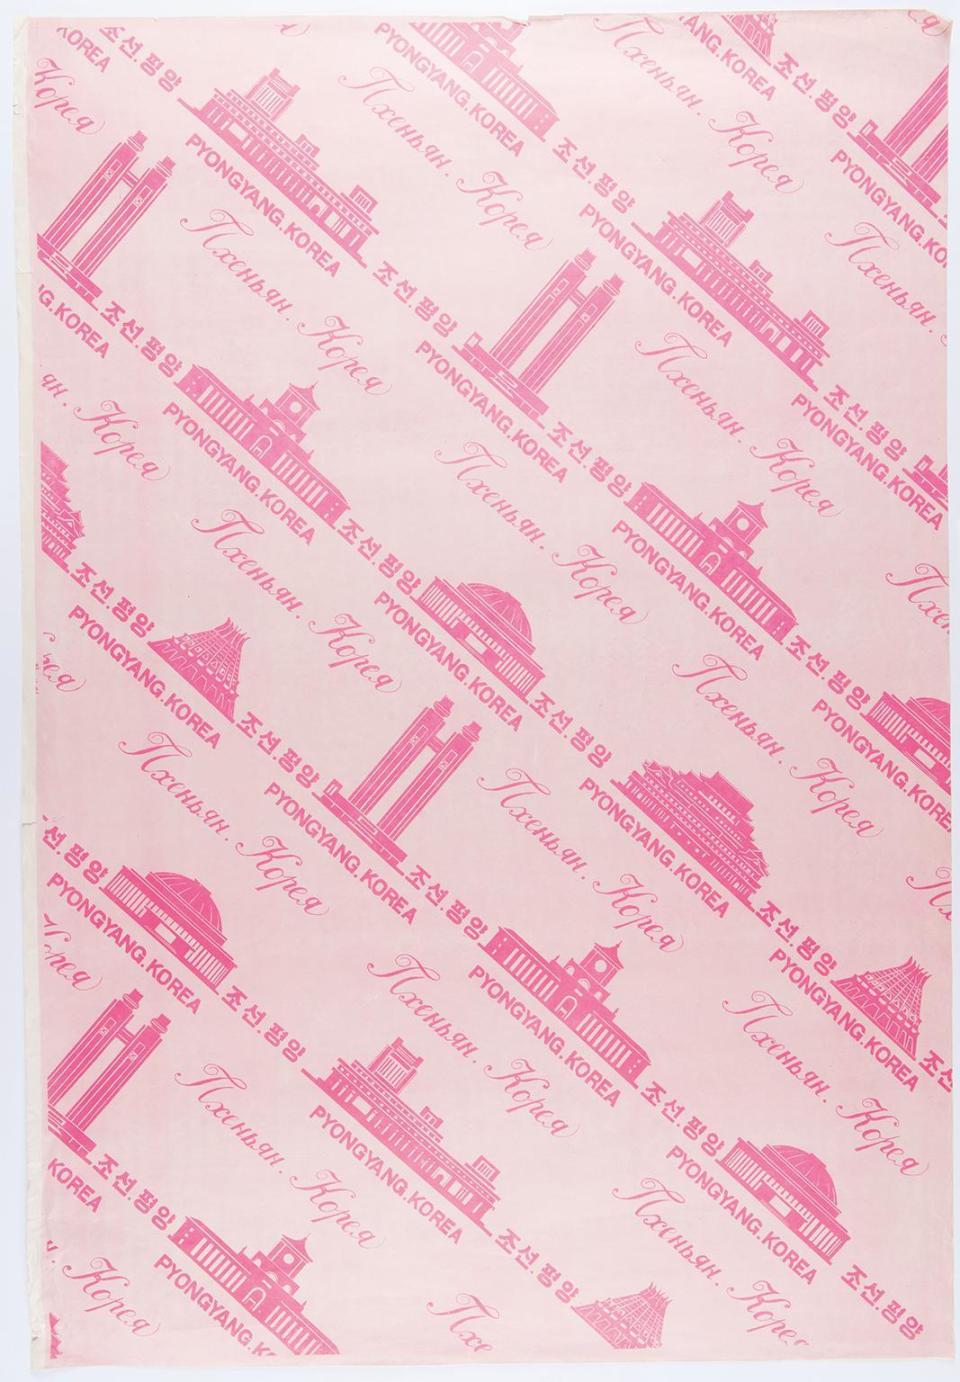 An example of North Korean wrapping paper featuring the monuments of the capital